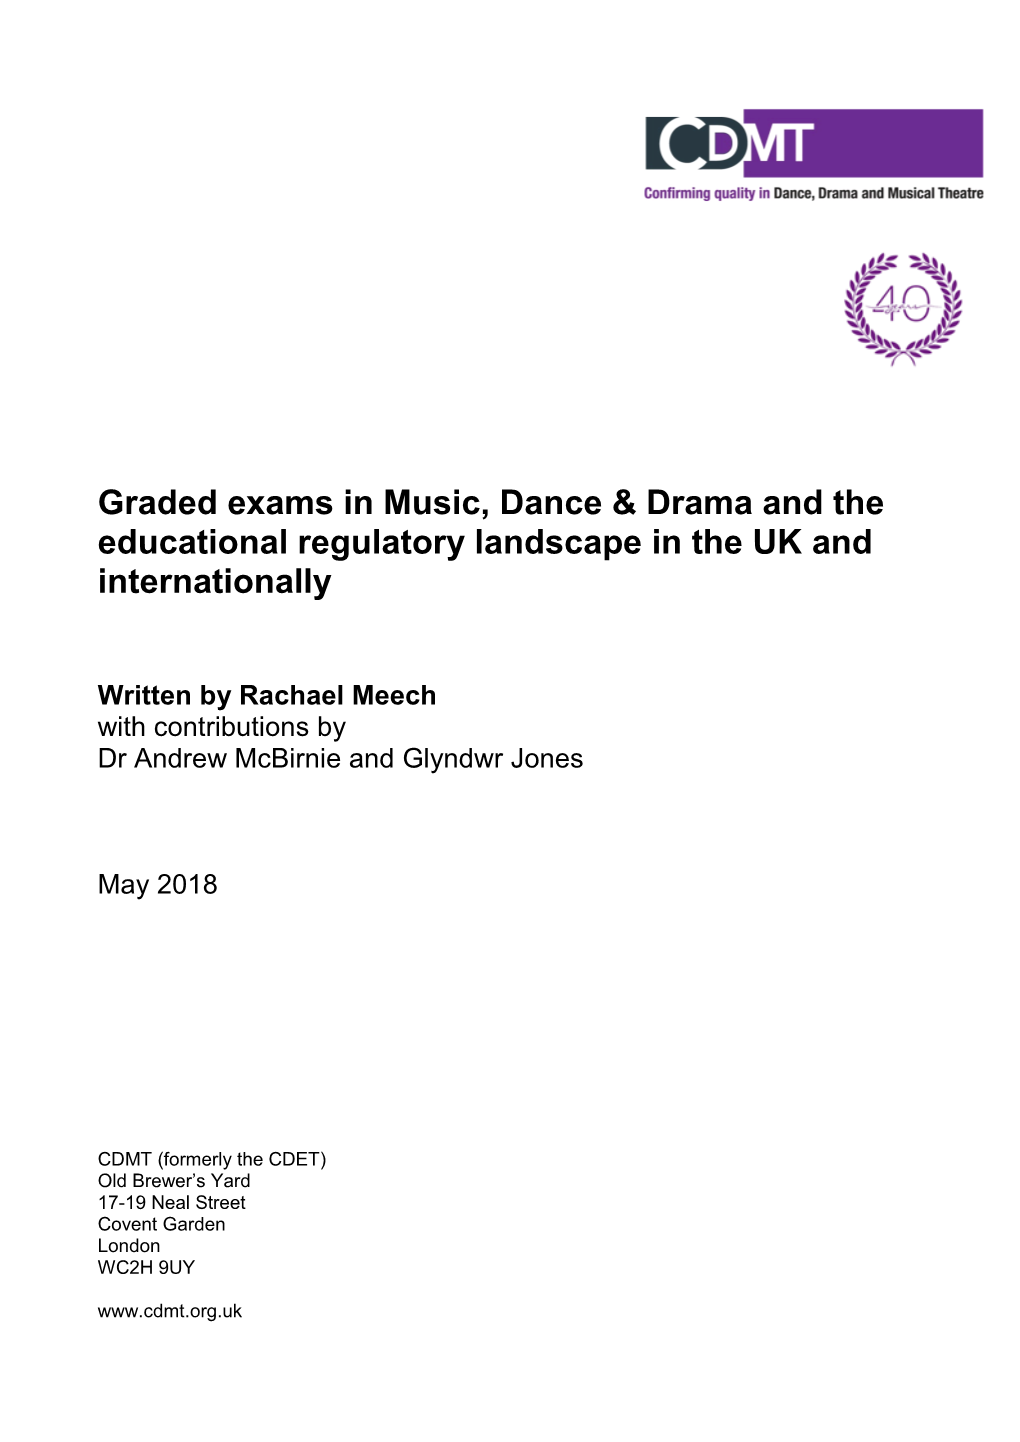 Graded Exams in Music, Dance & Drama and the Educational